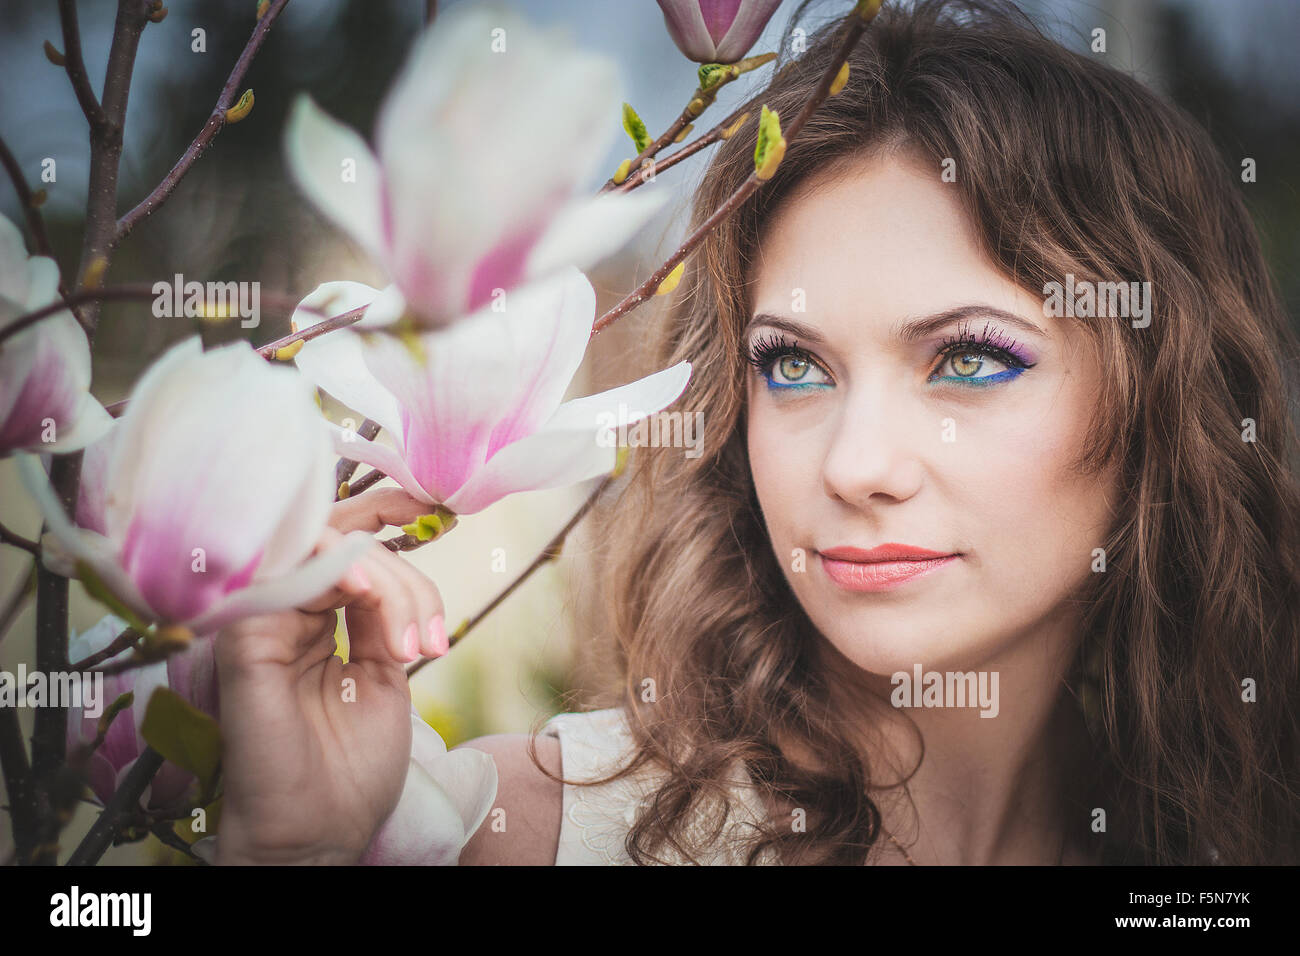 Beautiful spring girl with flowers Stock Photo